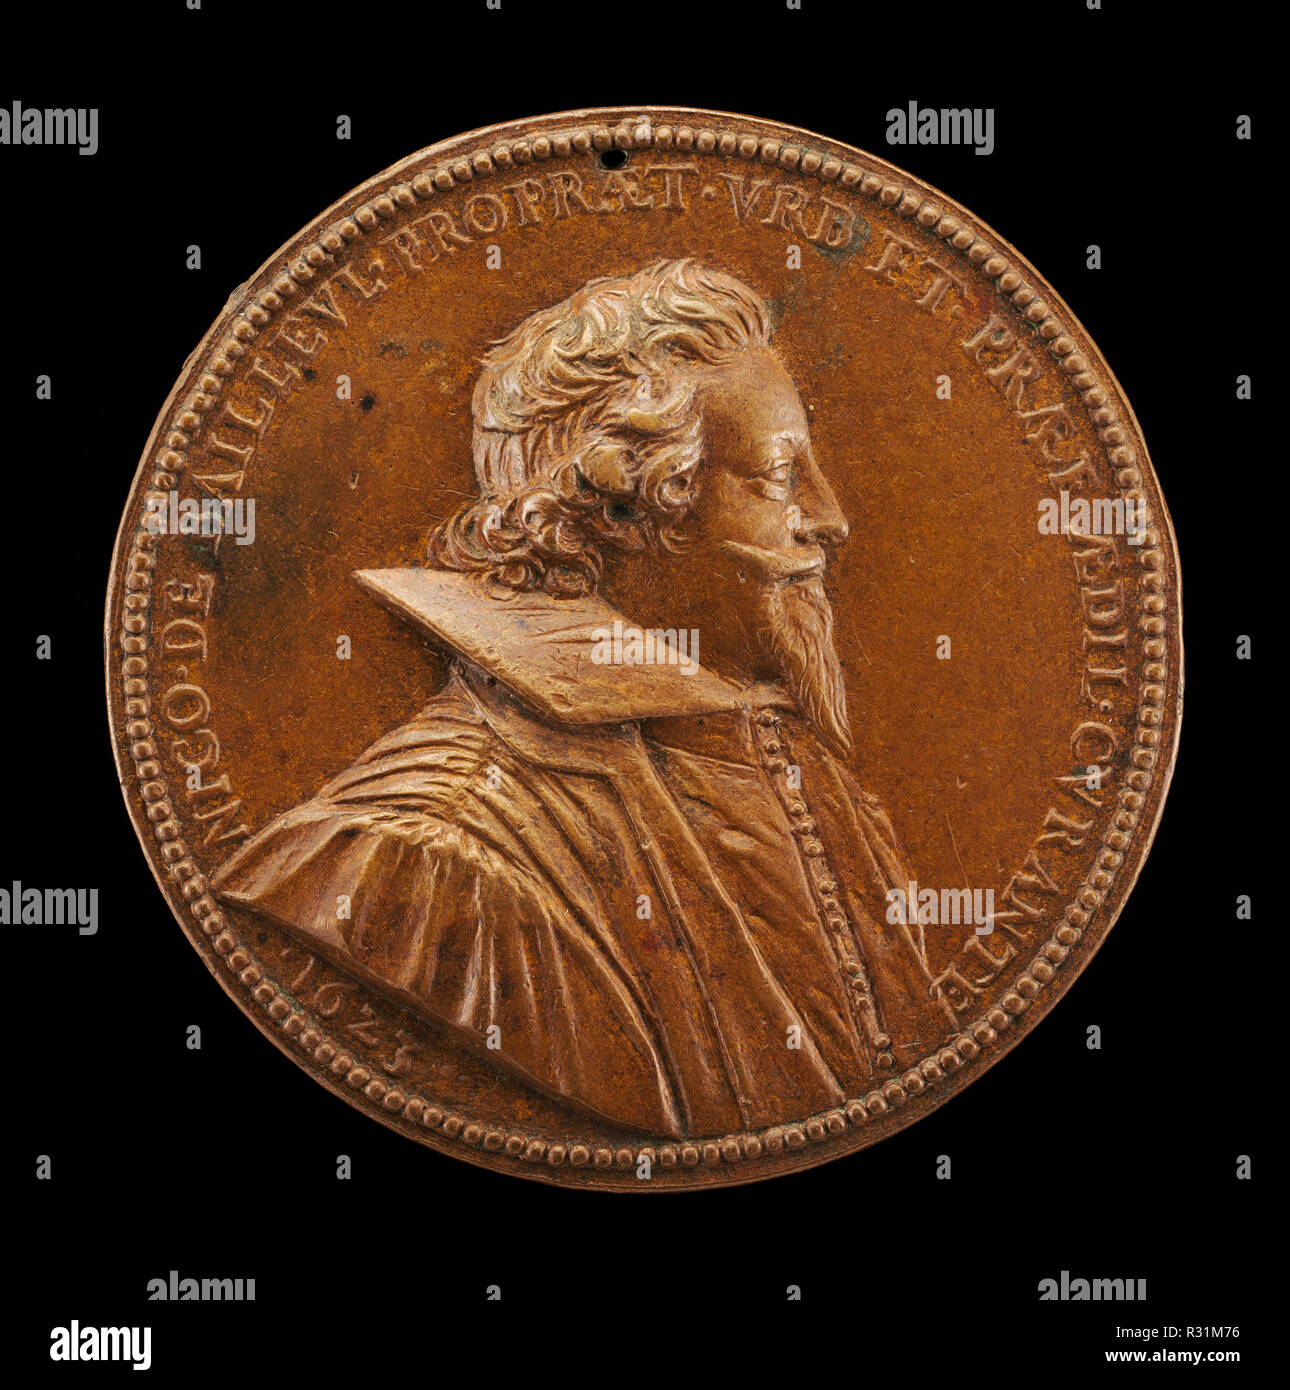 Nicolas de Bailleul, 1587-1652, Mayor of Paris 1622-1628 [obverse]. Dated: 1623. Dimensions: overall (diameter): 5.27 cm (2 1/16 in.)  gross weight: 38.9 gr (0.086 lb.)  axis: 12:00. Medium: bronze. Museum: National Gallery of Art, Washington DC. Author: French 17th Century. Stock Photo